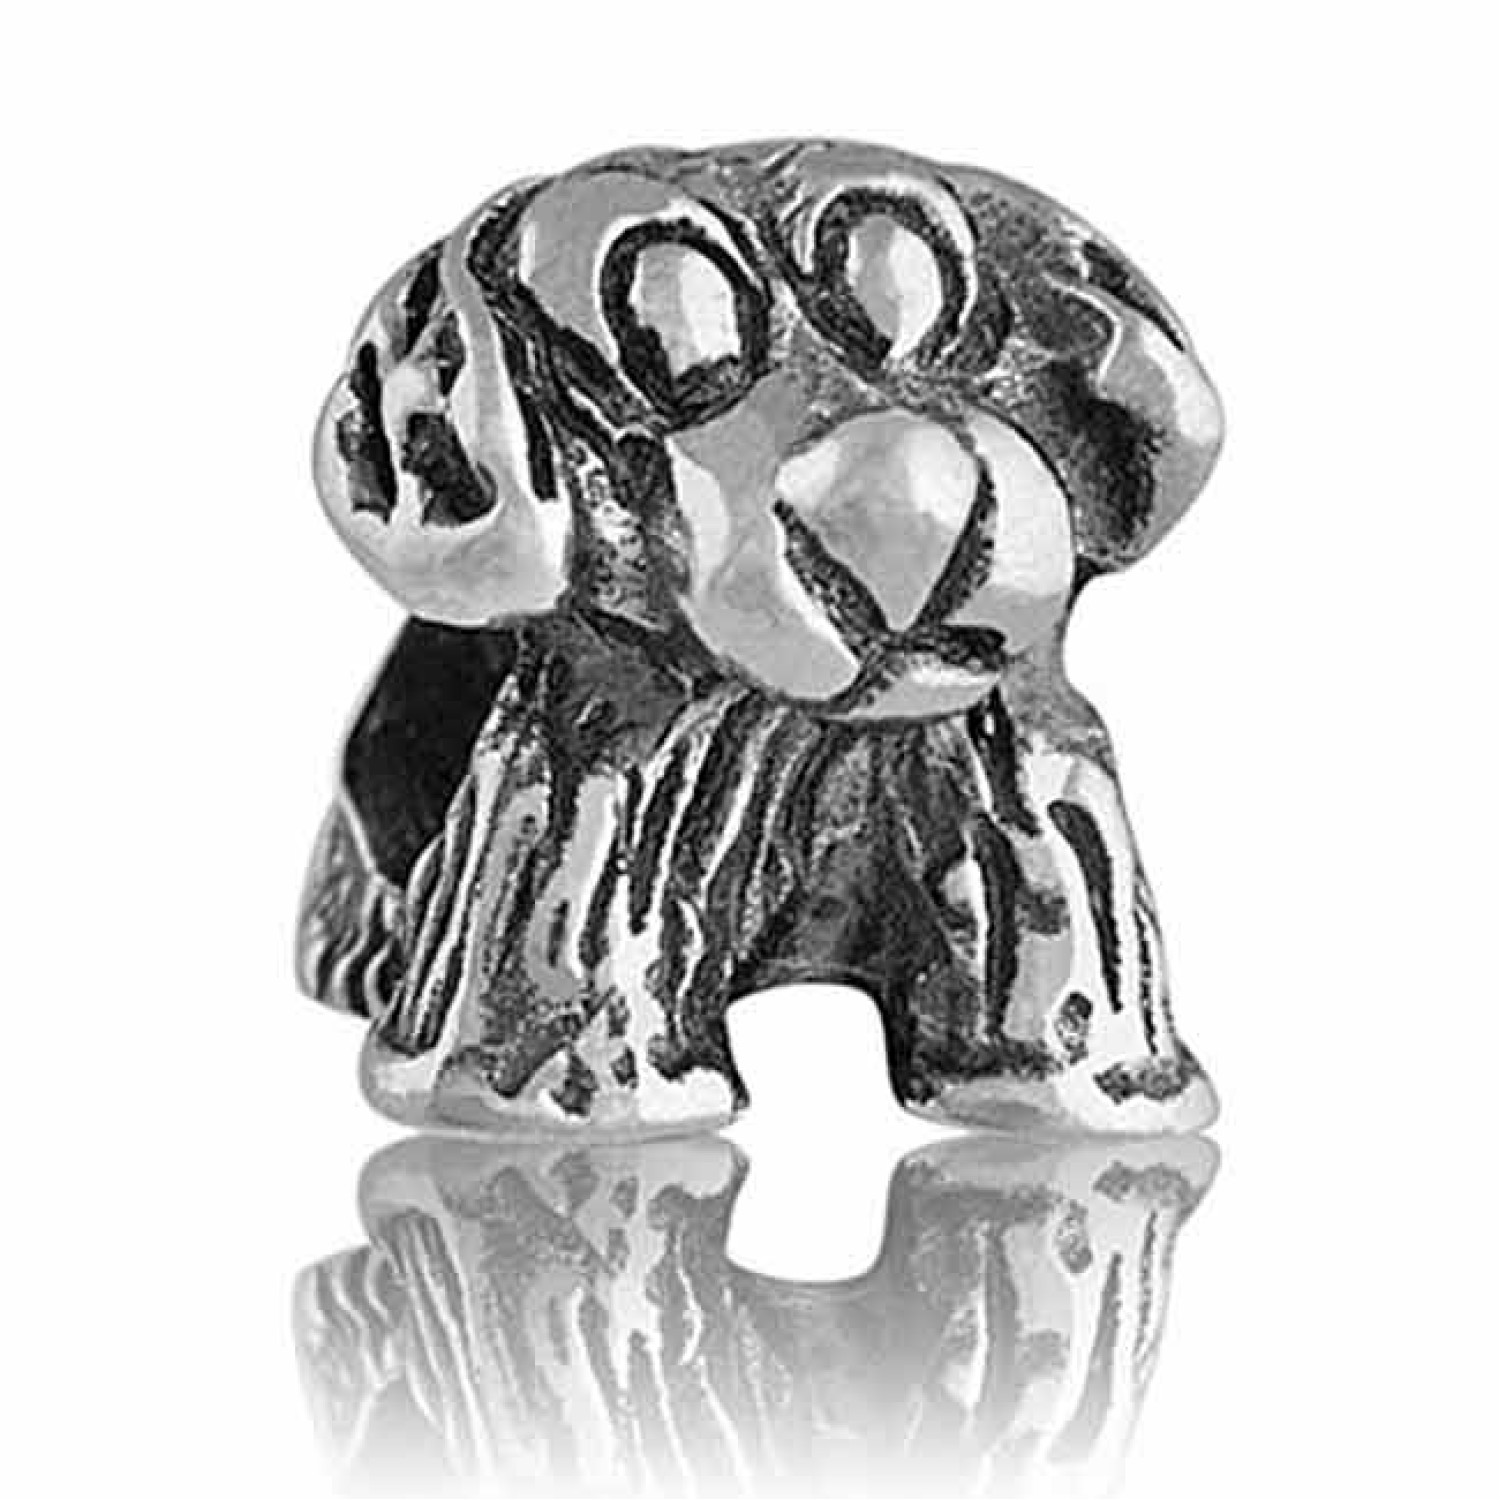 LK050 Evolve Charm NZ Sheep Dog Puppy. NZ Sheep Dog Puppy. Sterling Silver Christies exclusive 5 year guarantee compatible with all other major brands Bracelets But not compatible with Lovelinks Bracelets (Non Universal Type) @christies.online